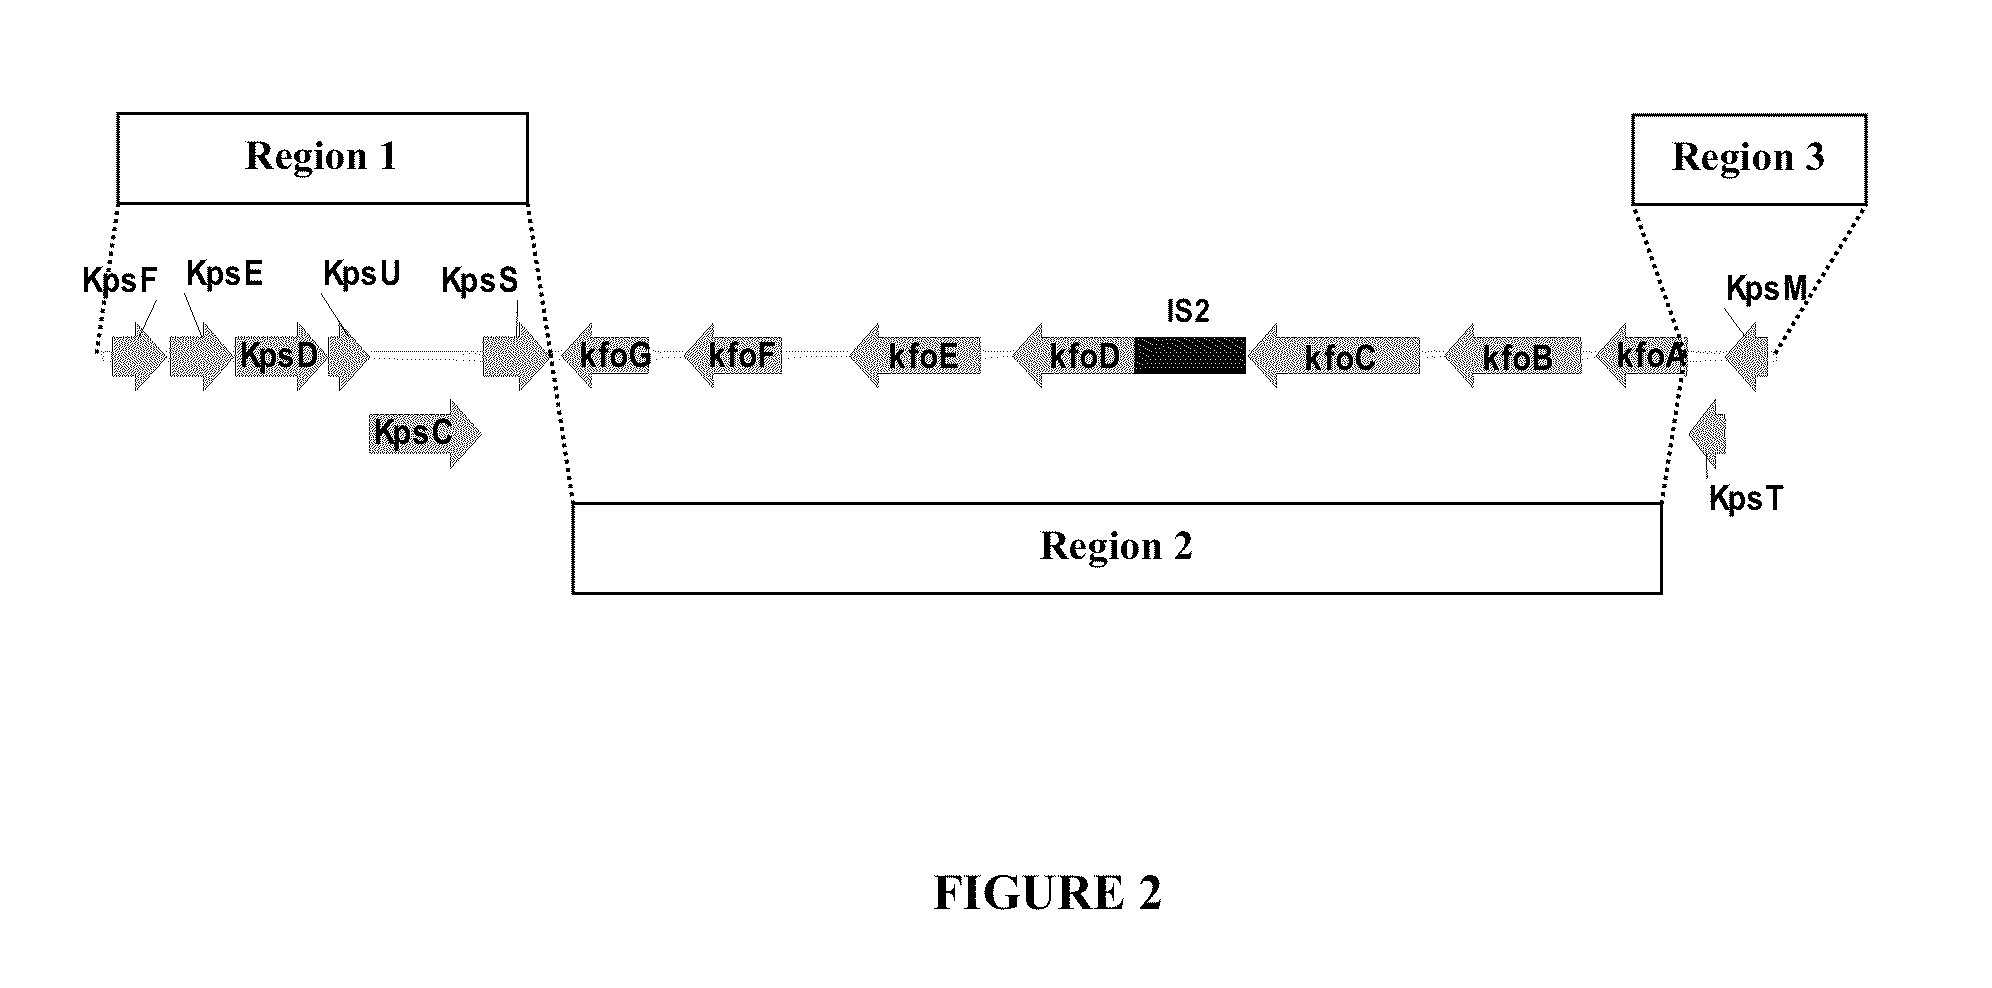 Compositions and Methods for Bacterial Production of Chondroitin